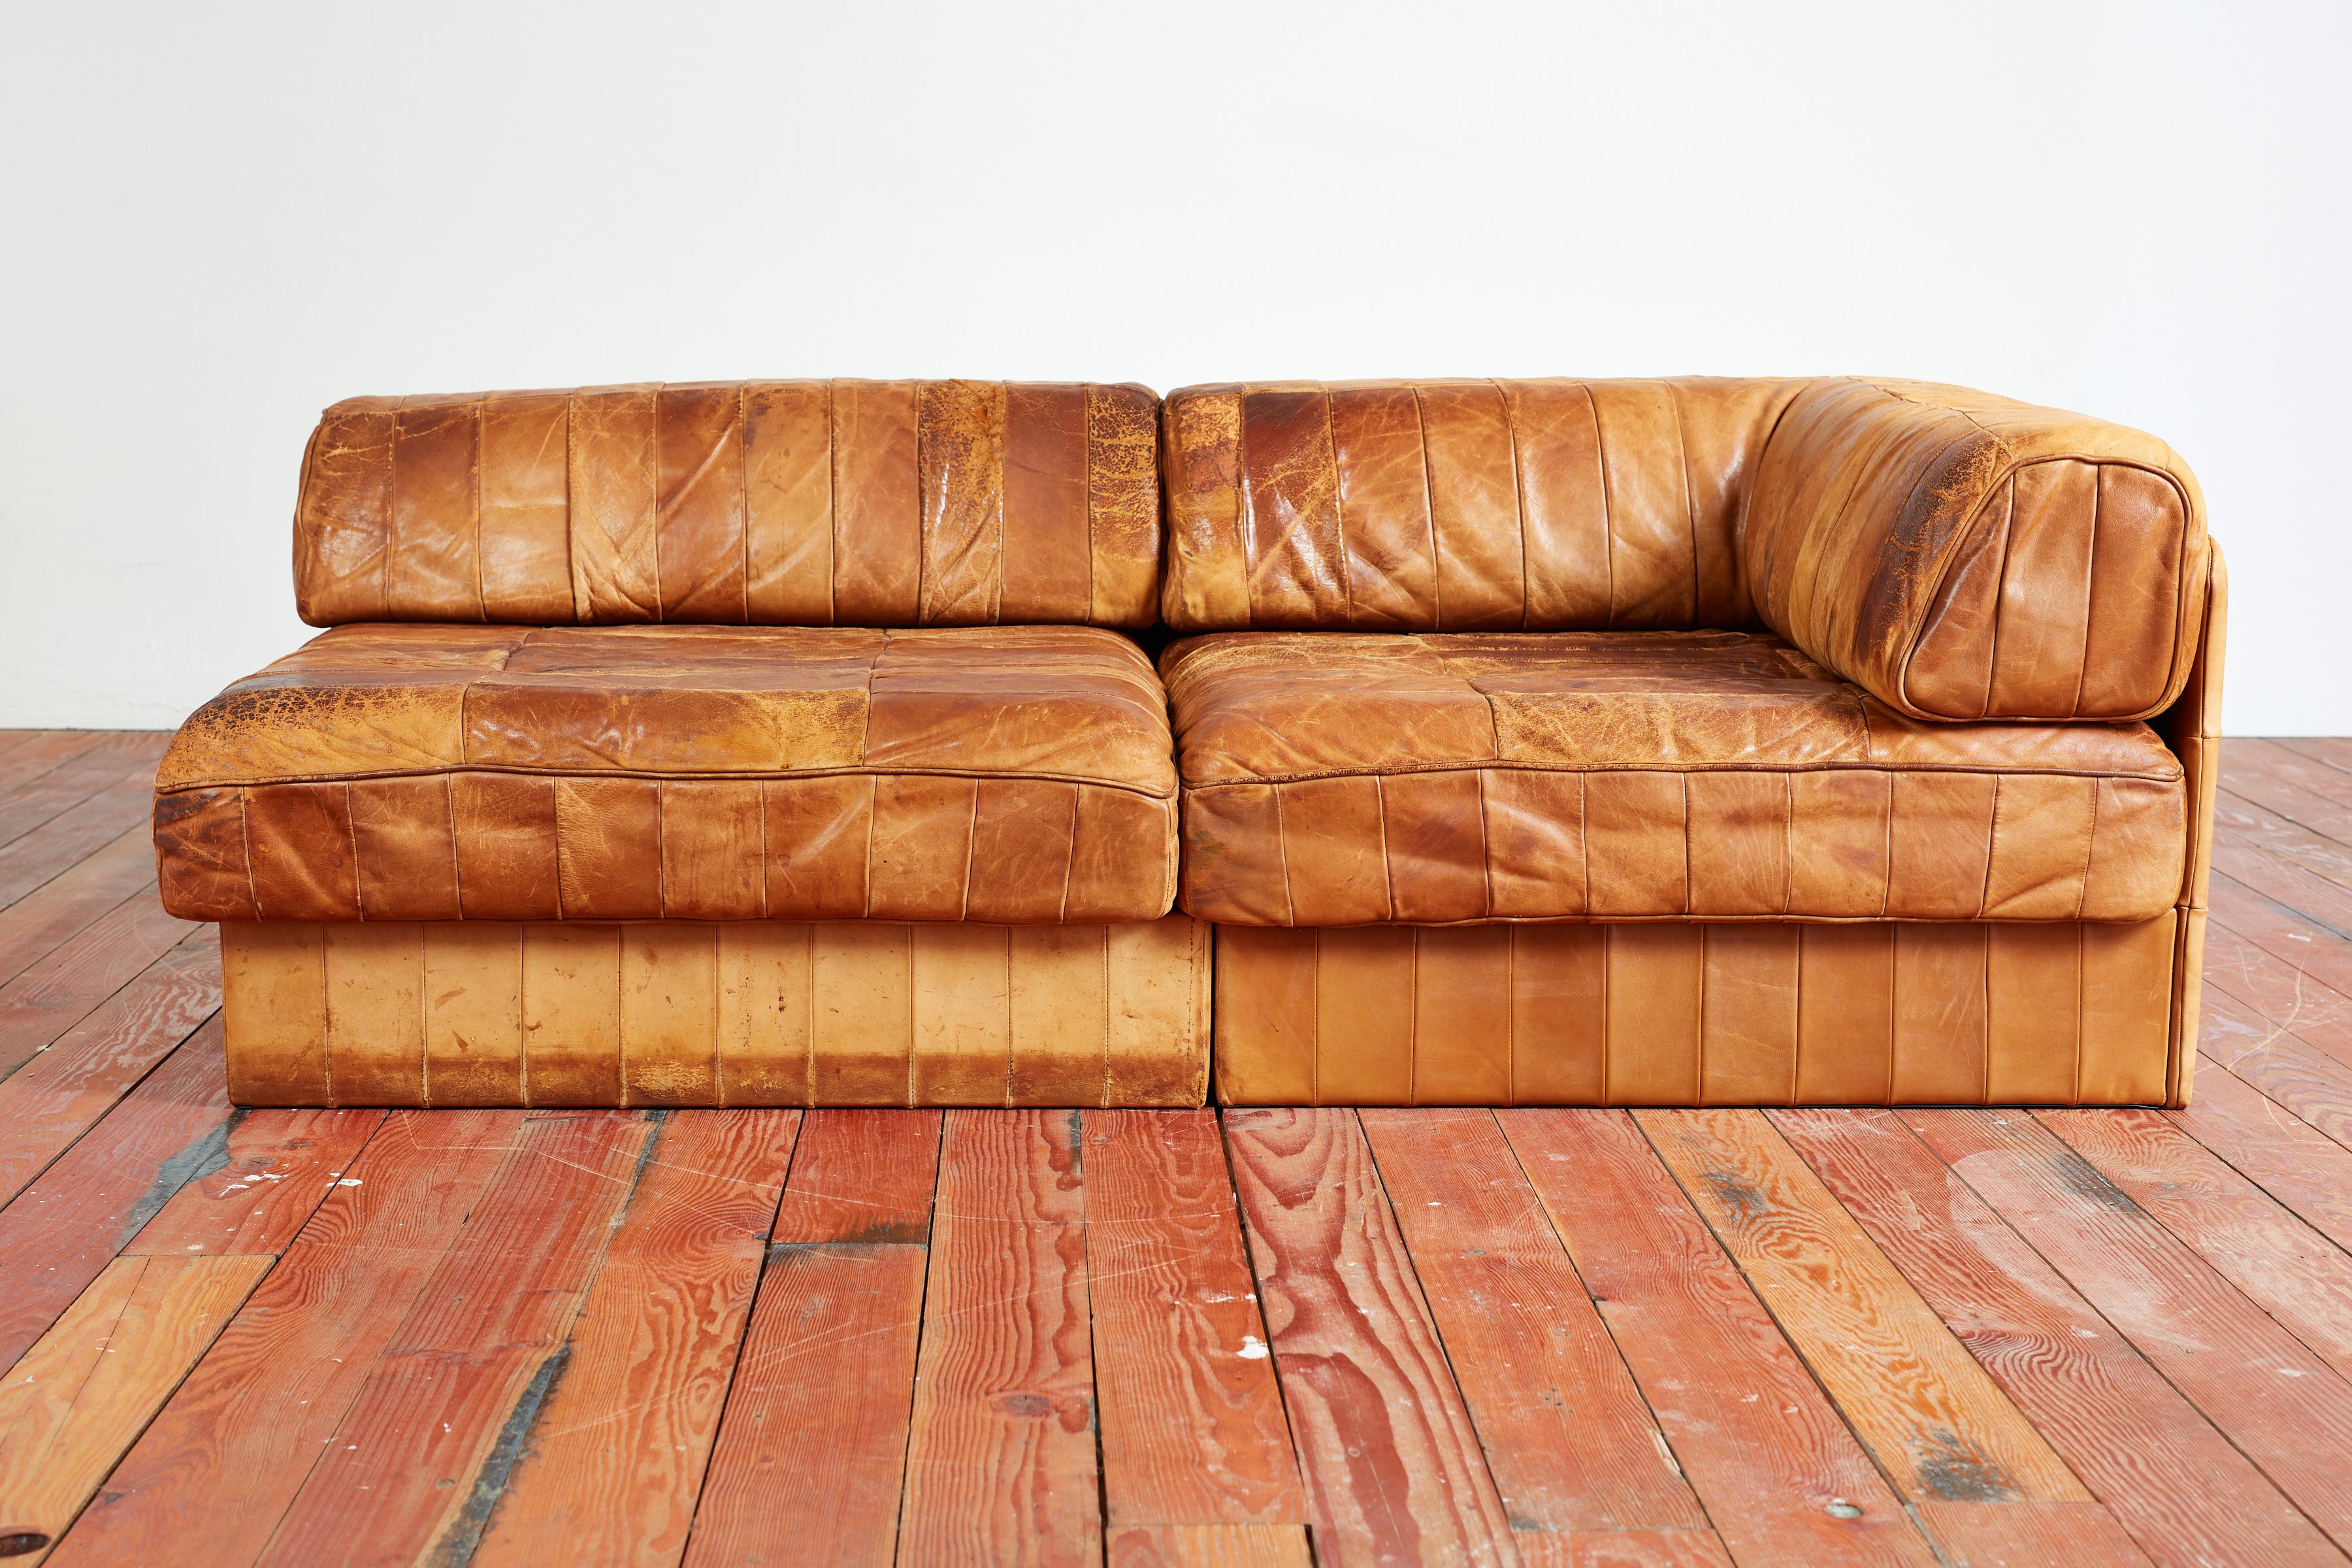 Patchwork leather modular sofa or chaise by De Sede
Switzerland, 1970's 
Beautiful patina to patchwork caramel leather. 
Matching pair of chairs sold separately - which could create a sectional. 

Measures: Height: 14.57 in. (37 cm)
Width: